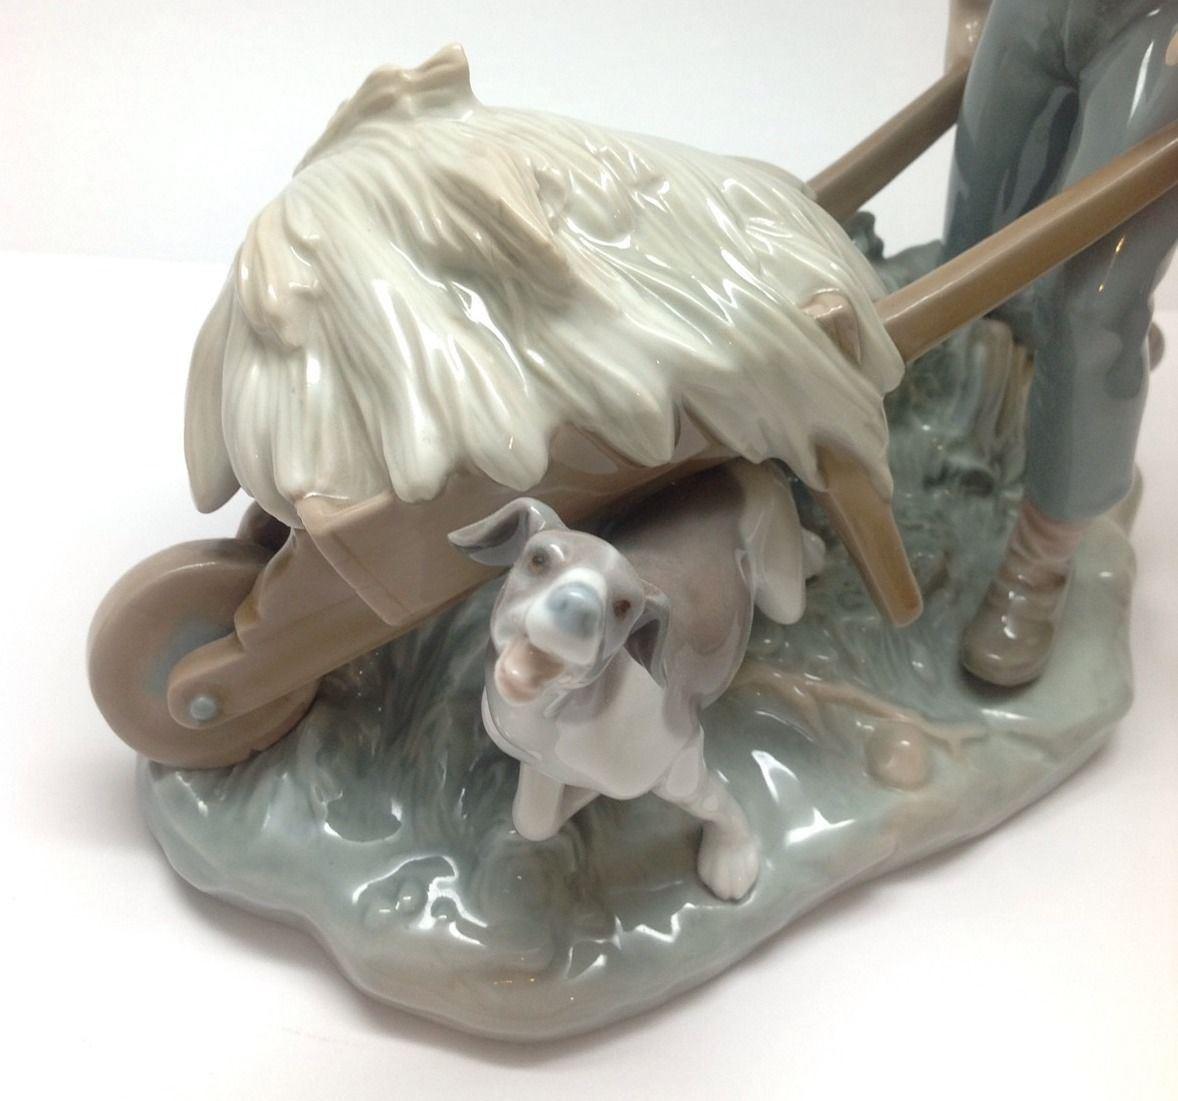 Lladro boy with wheelbarrow and dog porcelain figurine. 
Marked on bottom: LLADRO. 
Stands approx 8